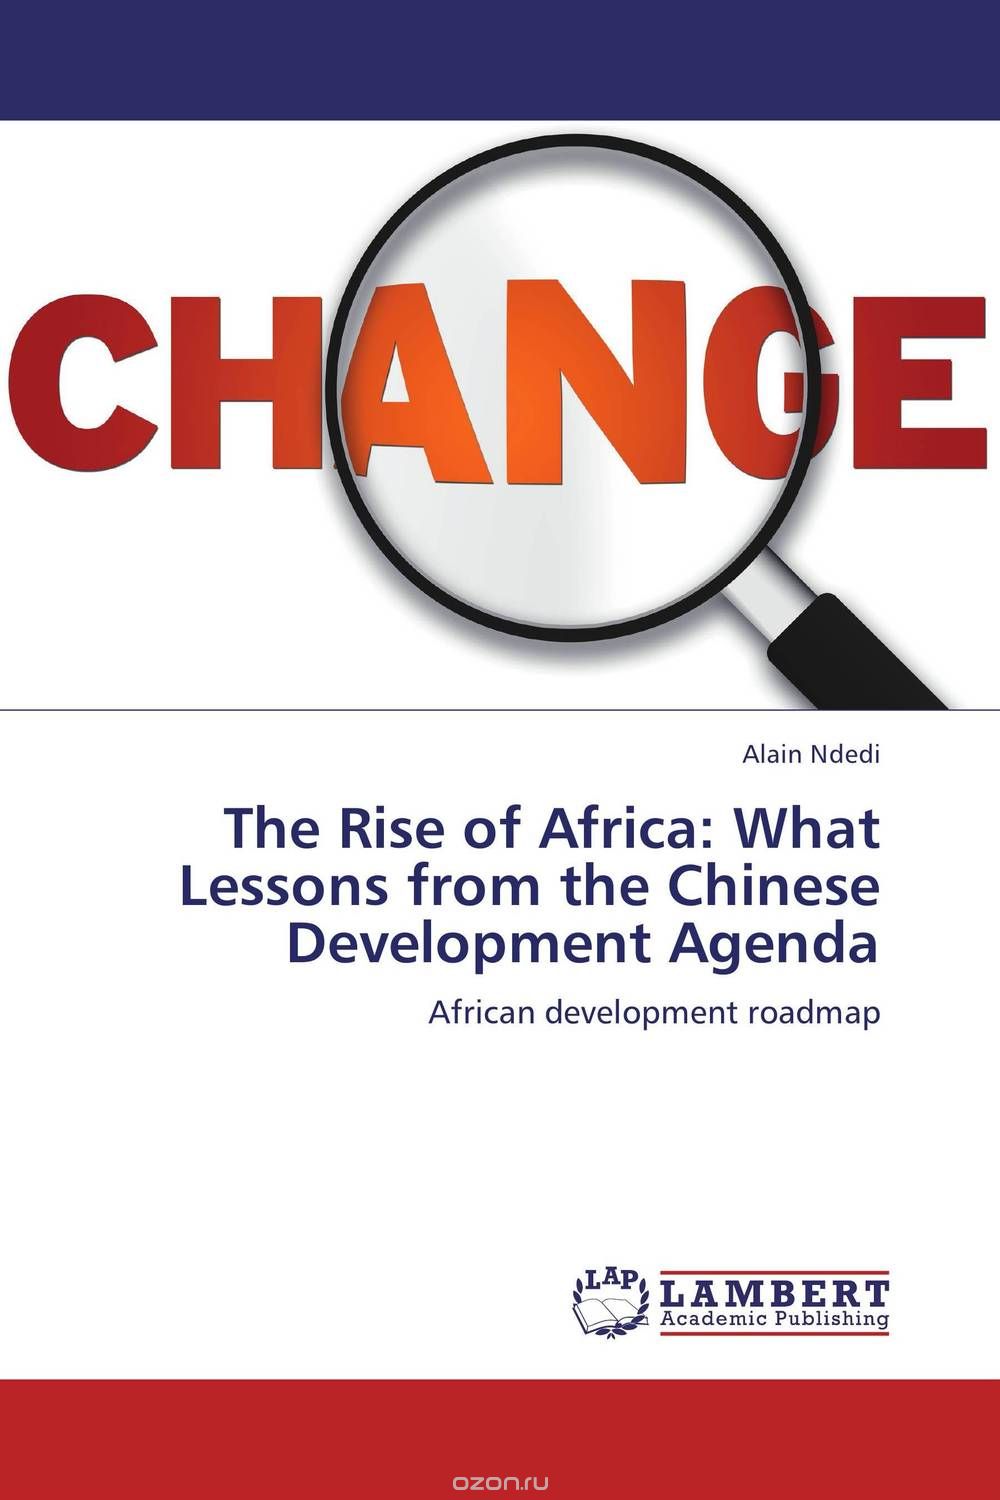 Скачать книгу "The Rise of Africa: What Lessons from the Chinese Development Agenda"